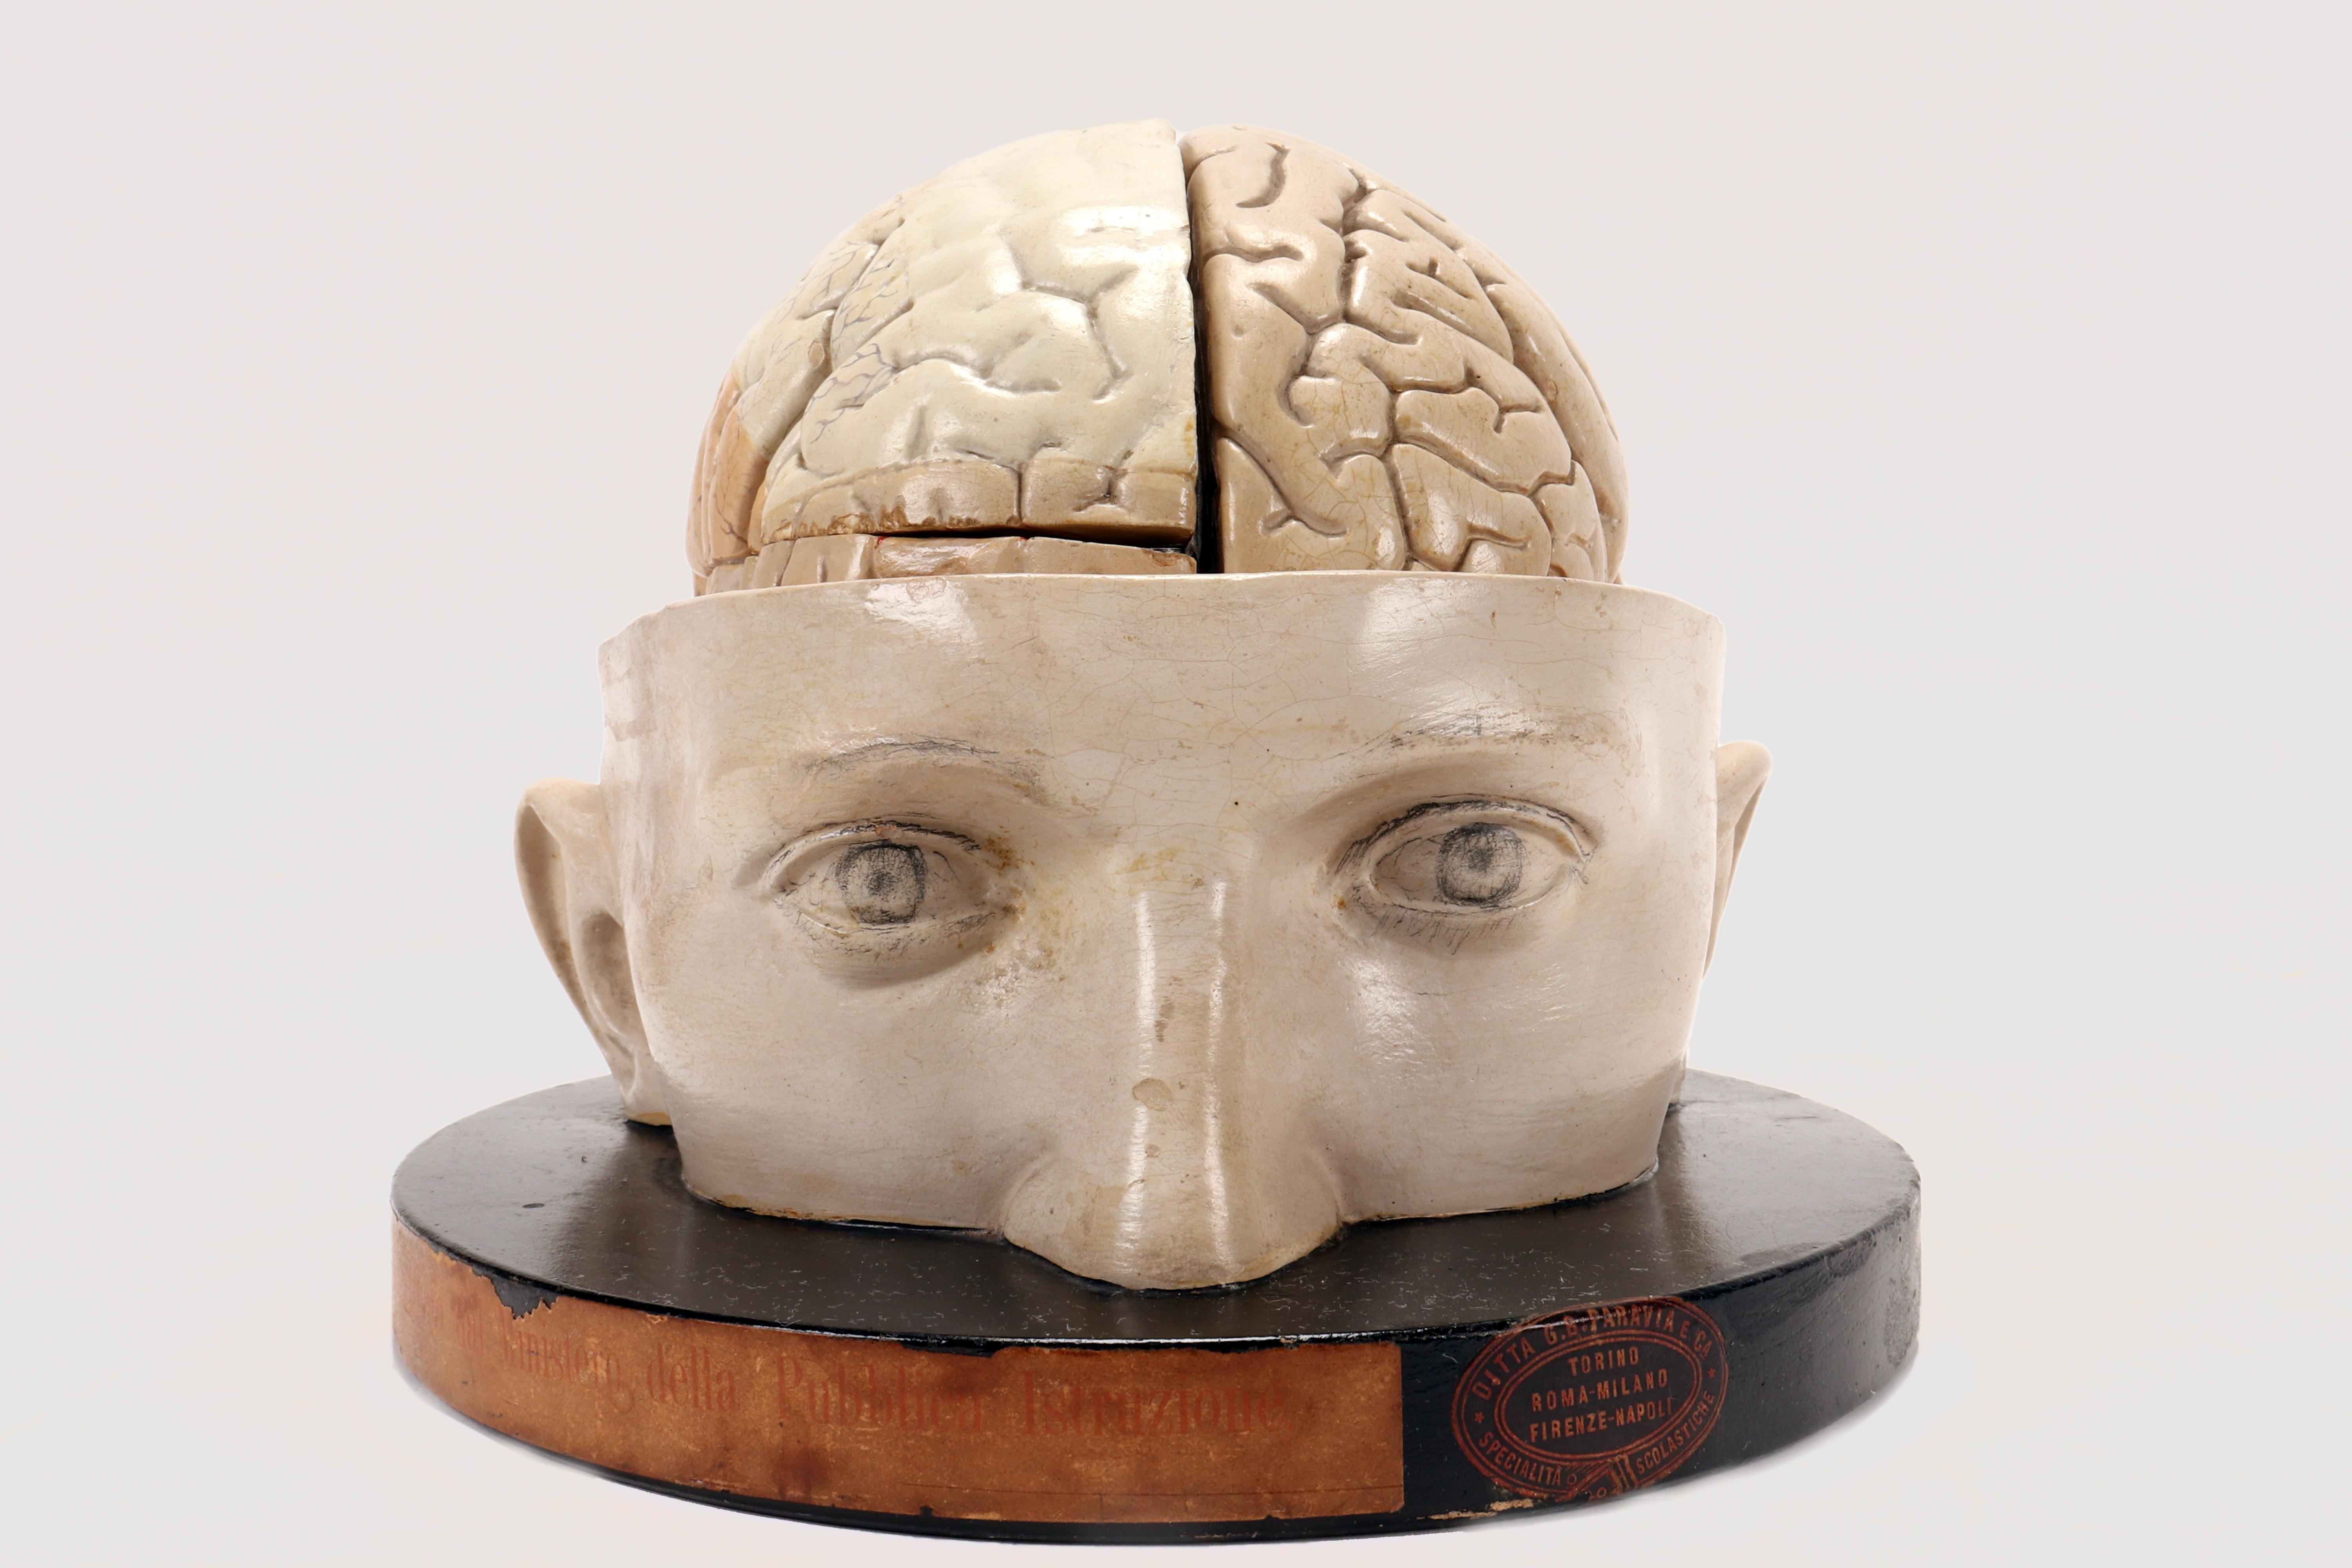 Anatomical model for schools, educational use, depicting the brain, divisible into three parts, inserted into a sectioned skullcap, all placed on a round plaster base painted black. Paravia, Milan, Italy circa 1920.